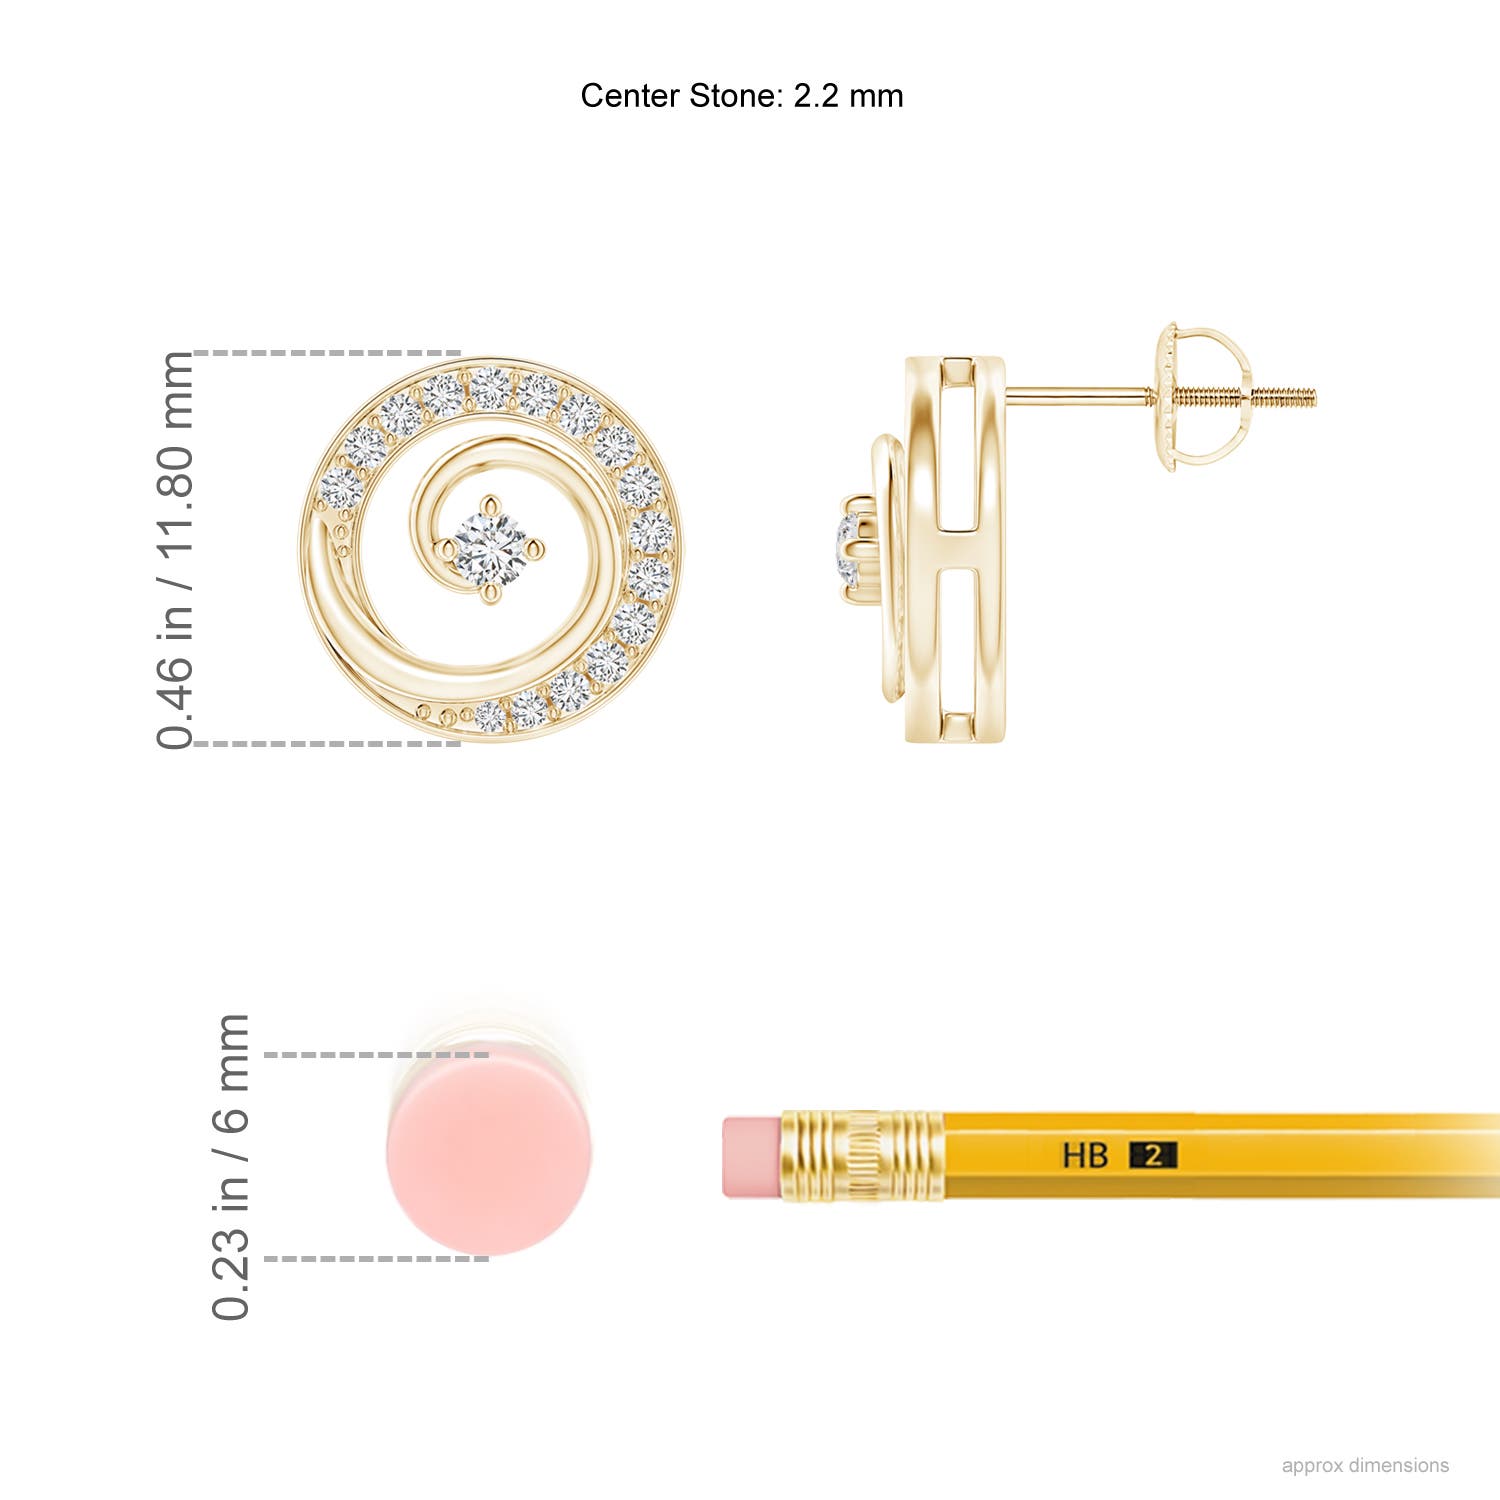 H, SI2 / 0.33 CT / 14 KT Yellow Gold